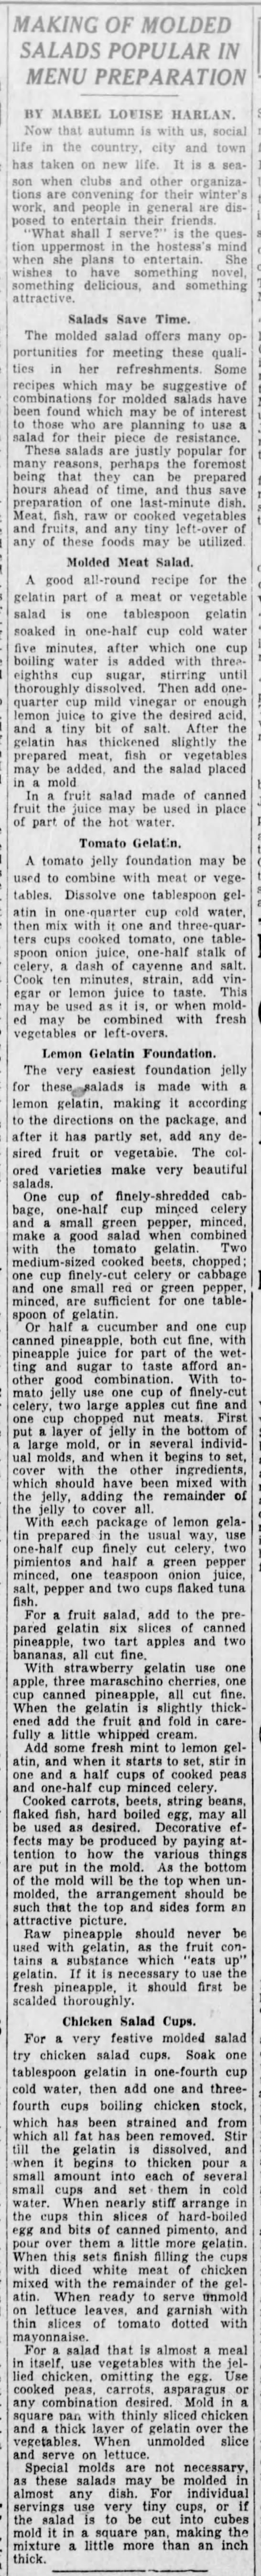 Molded salad recipes from 1929 - 